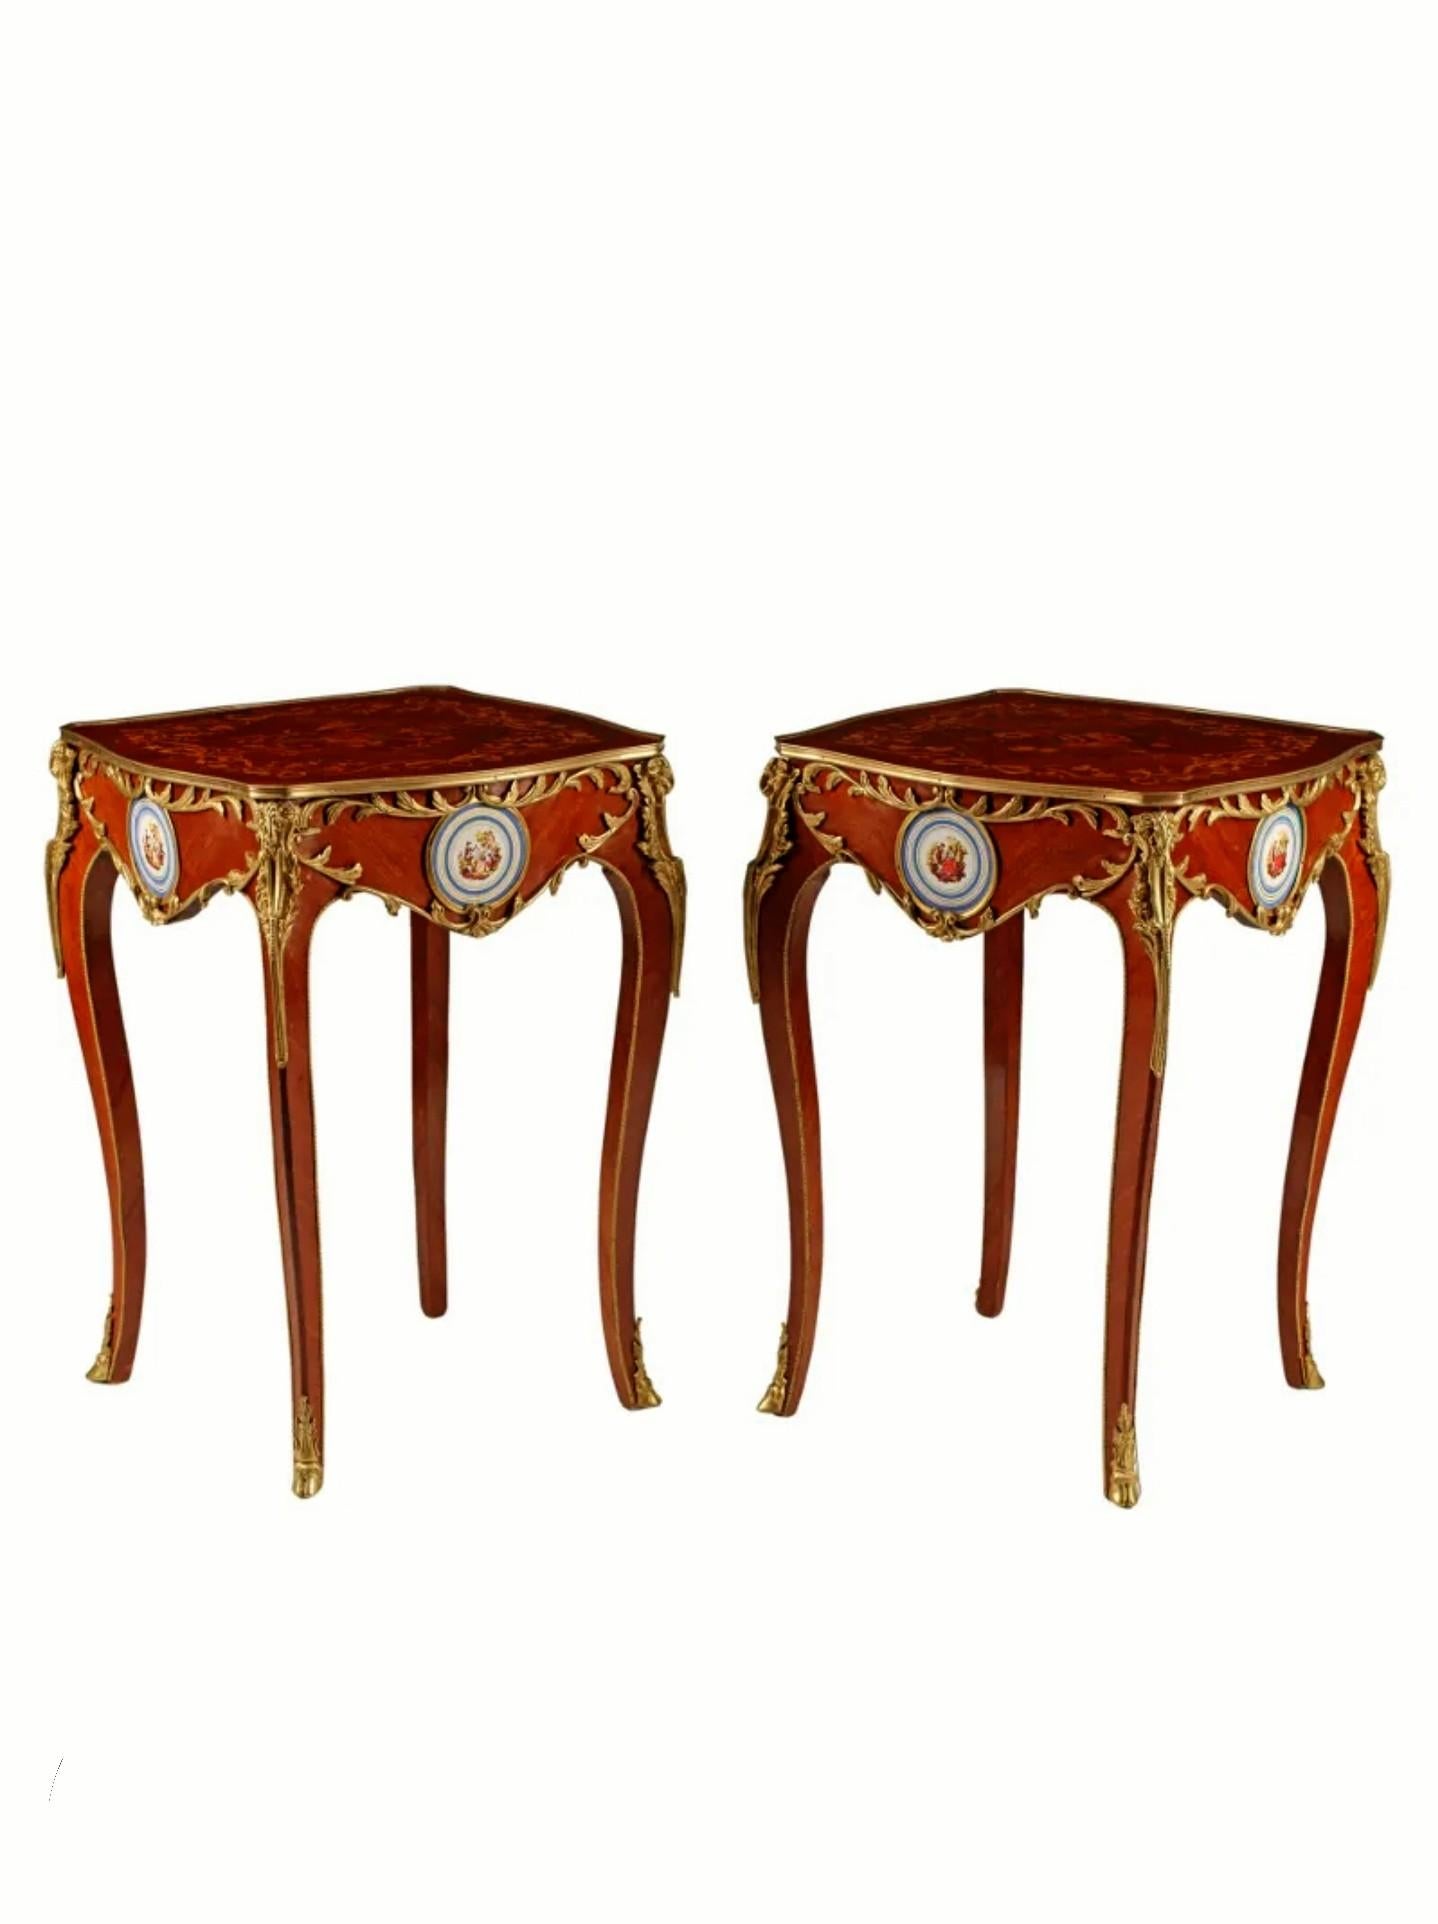 Fine French Louis XV Style Gilt Bronze Porcelain Side Table Pair For Sale 3